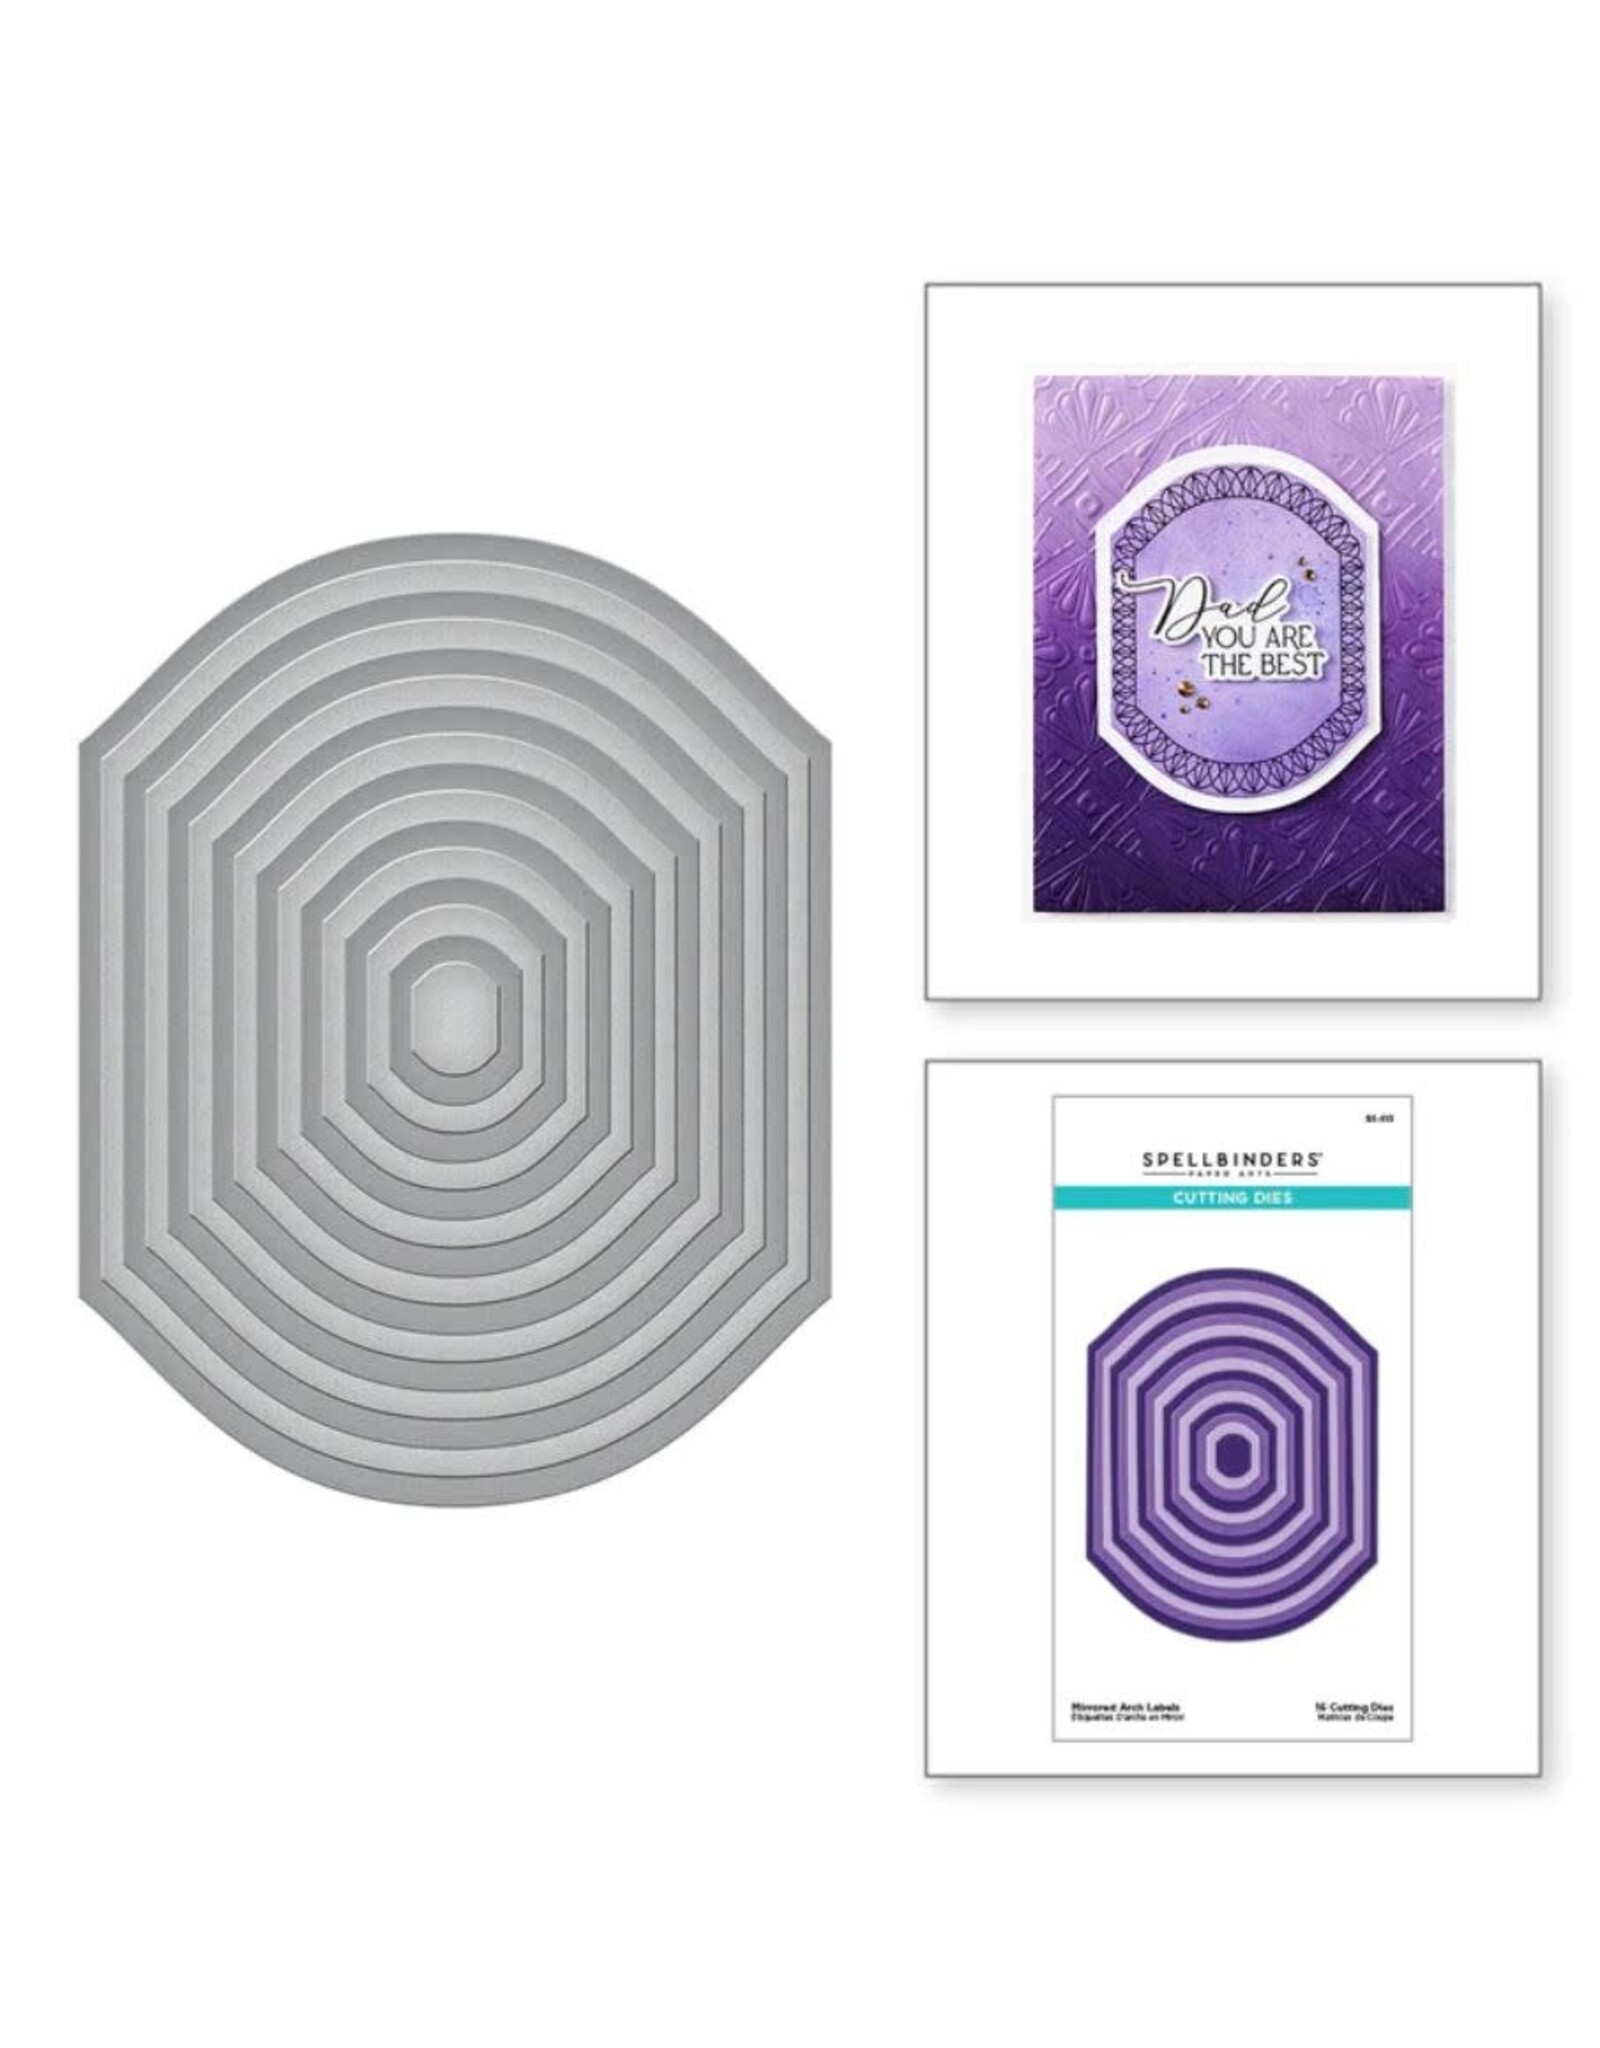 Spellbinders Mirrored Arch Collection - Mirrored Arch Labels Etched Dies